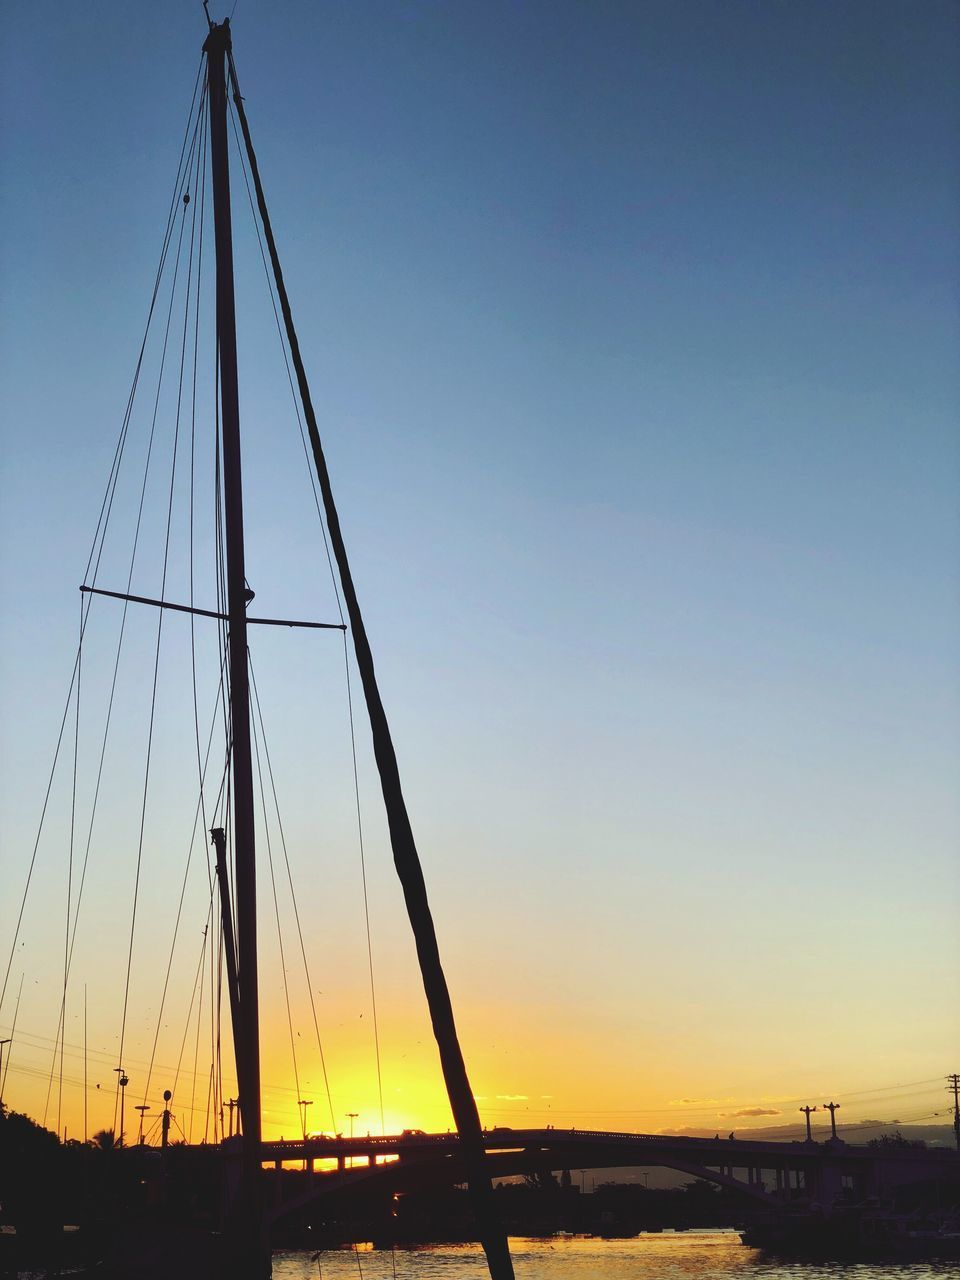 SILHOUETTE OF SAILBOAT AGAINST SKY DURING SUNSET